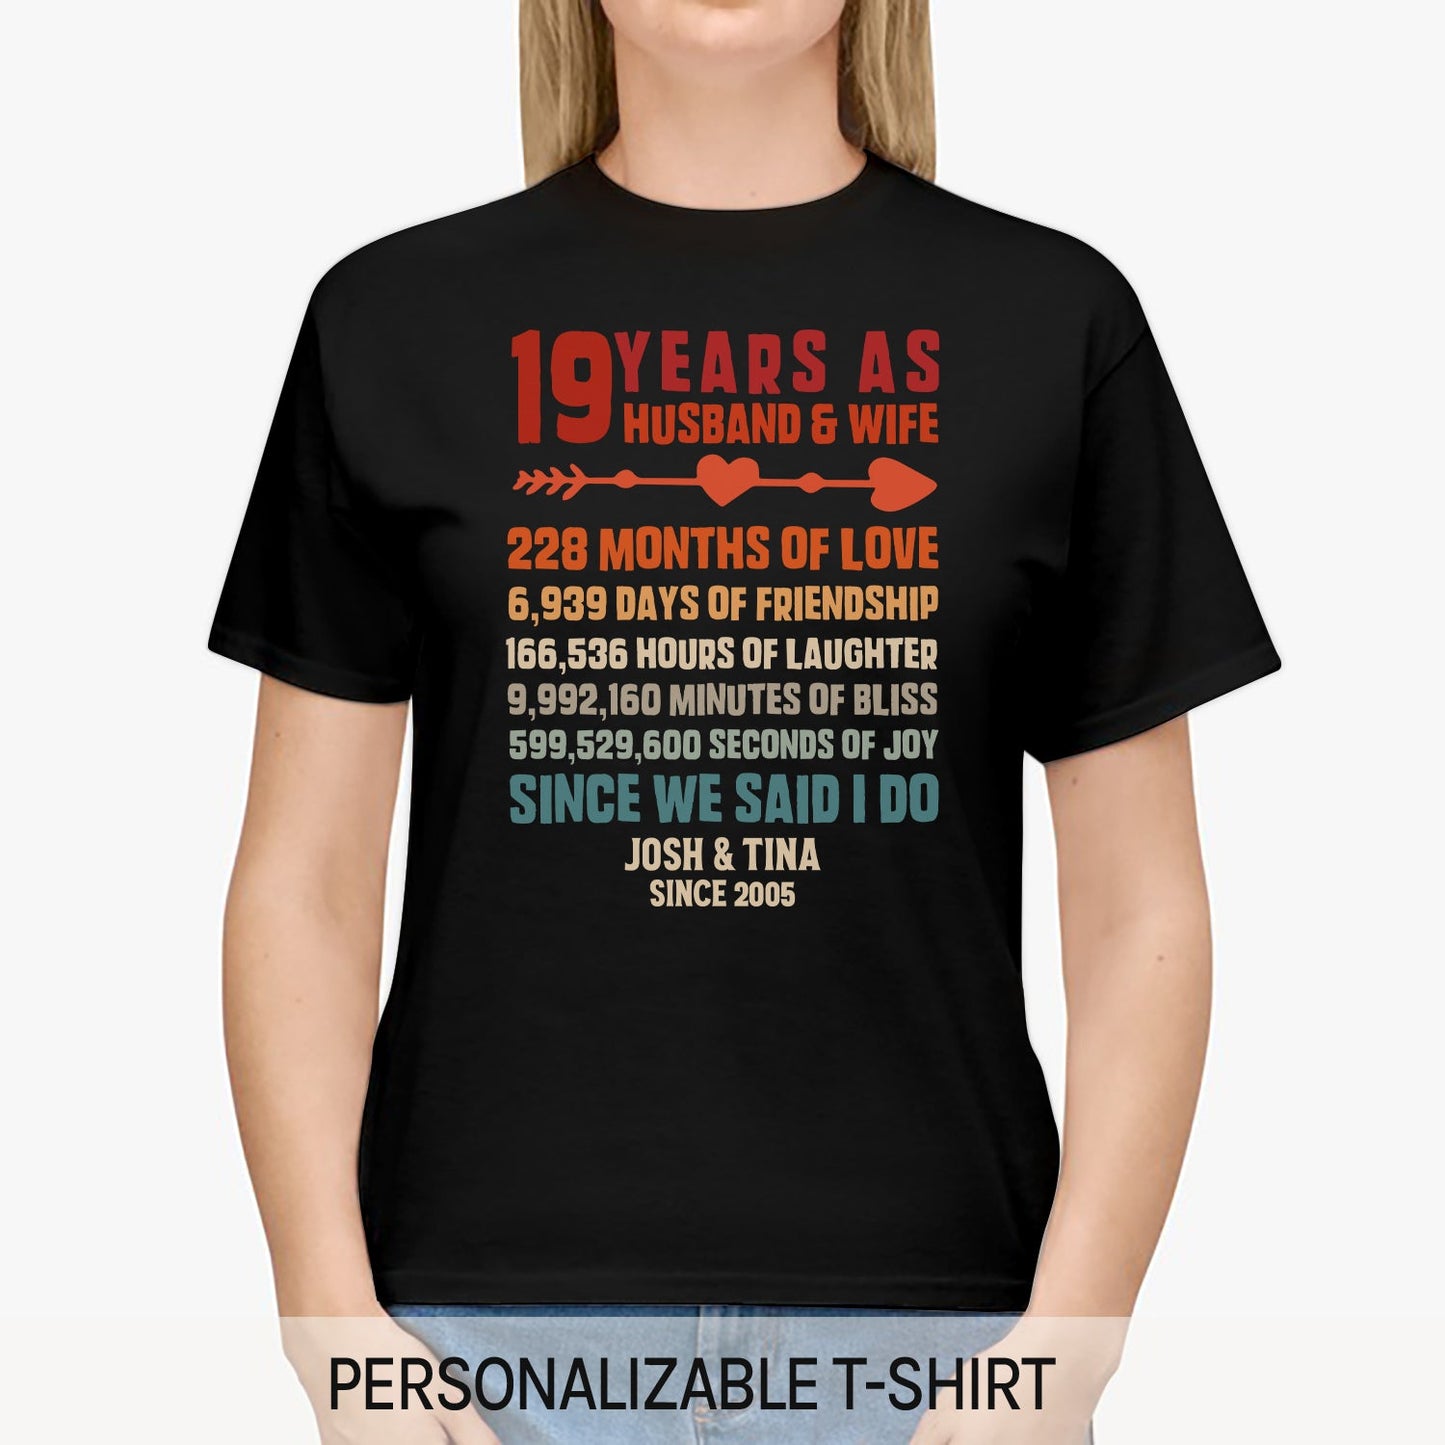 19 Years As Husband & WIfe - Personalized 19 Year Anniversary gift For Husband or Wife - Custom Tshirt - MyMindfulGifts